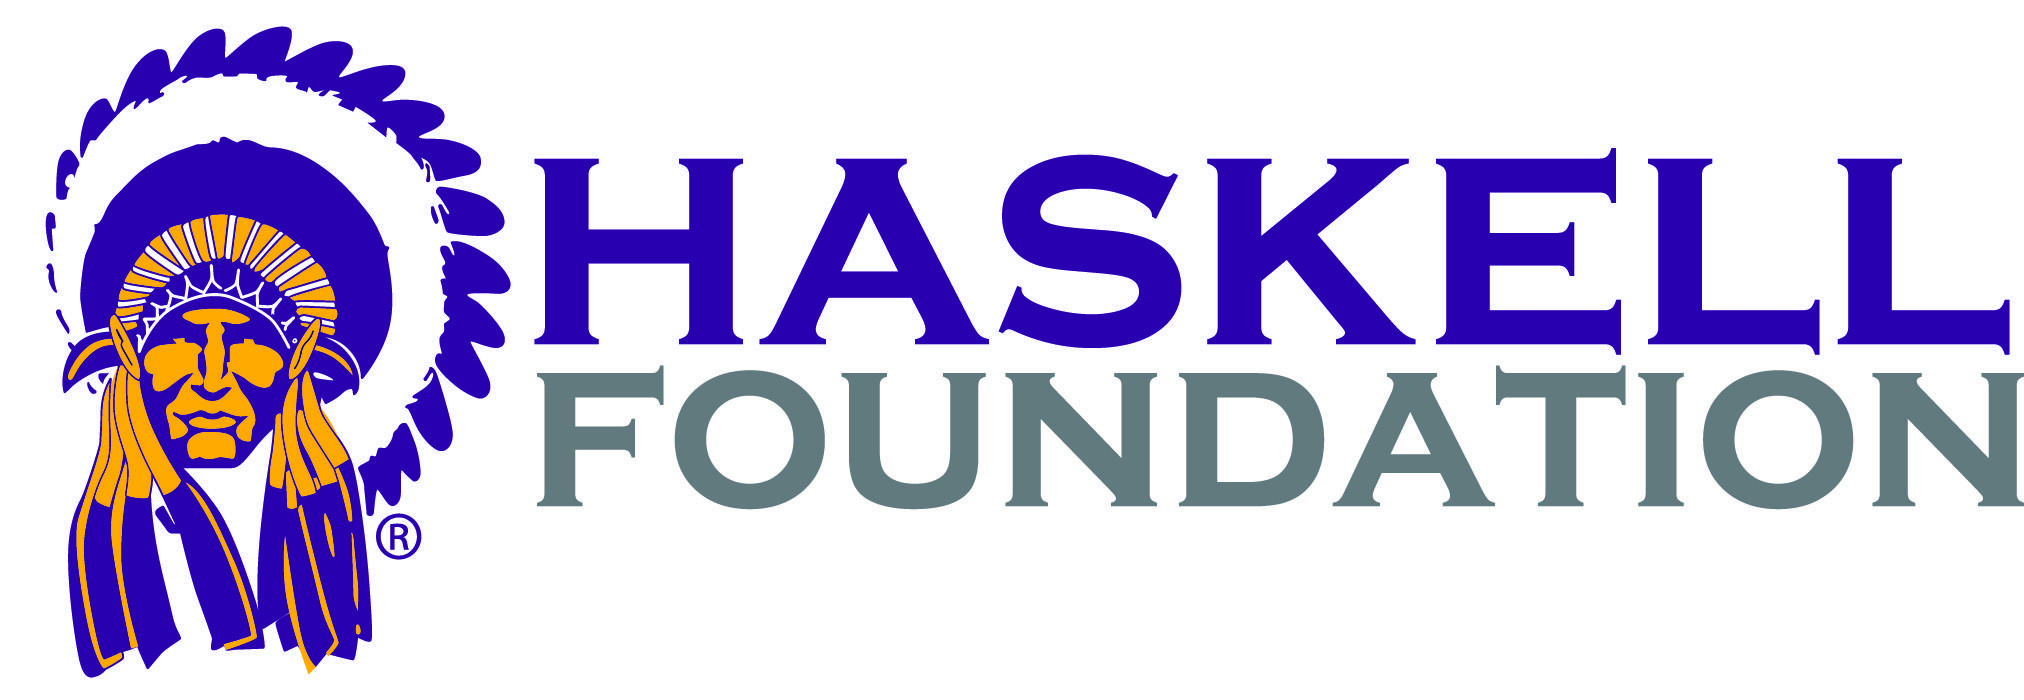 Haskell Logo - haskell logo Meetings and Events